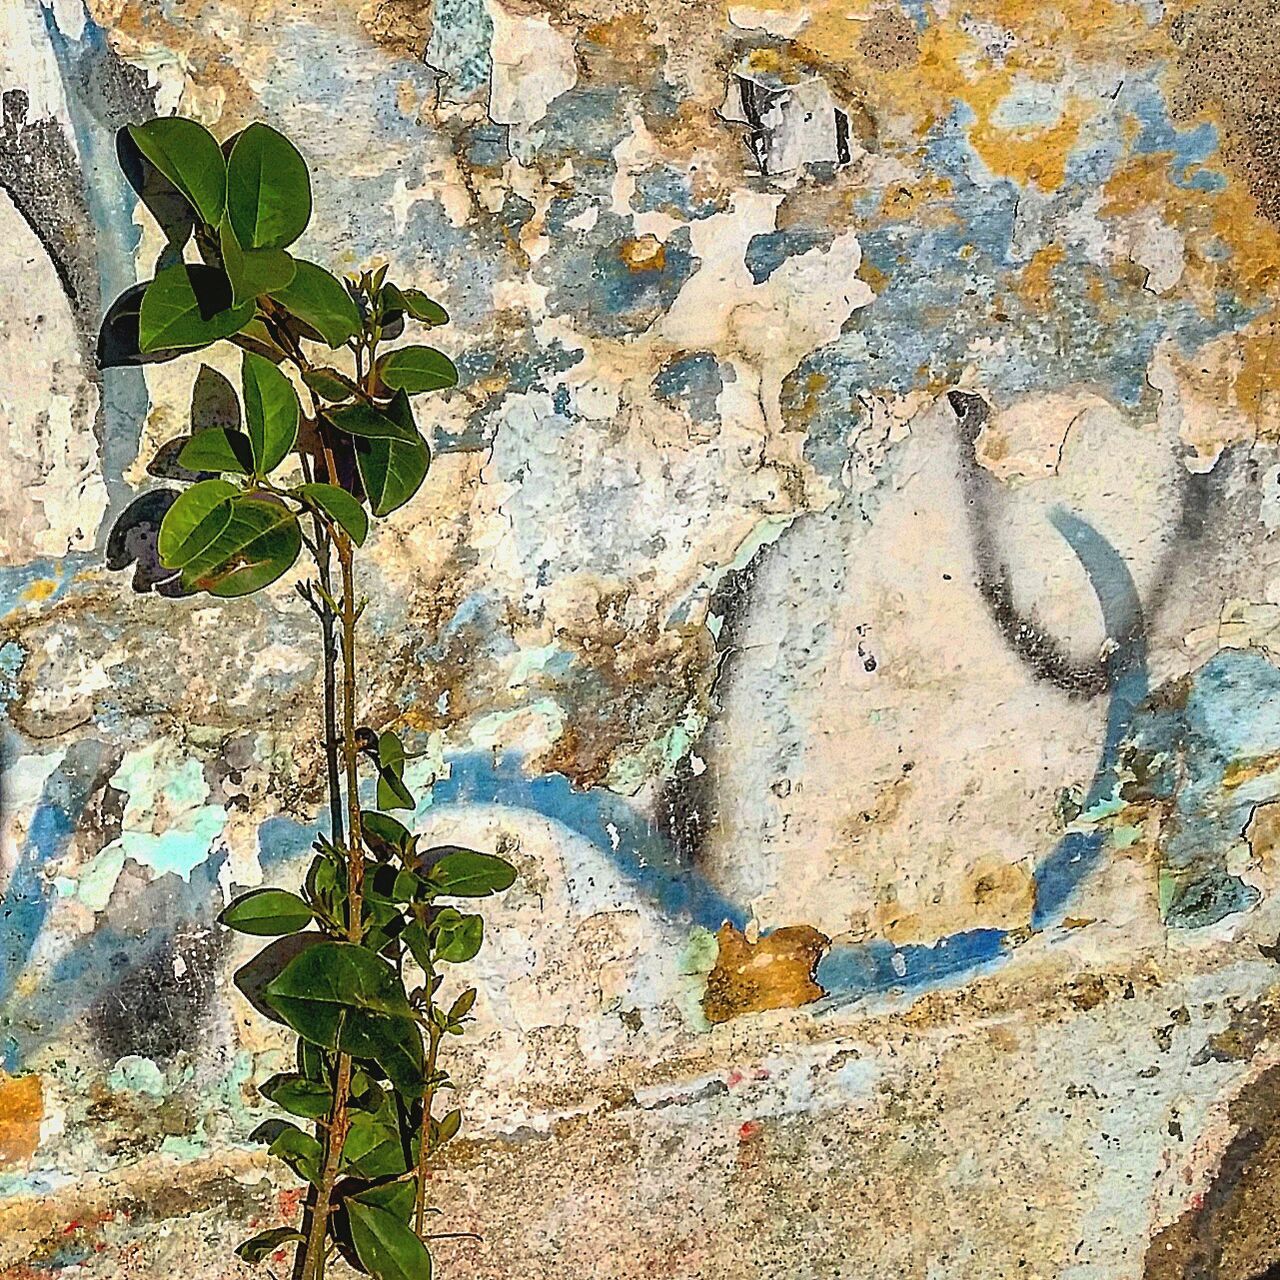 plant, wall - building feature, growth, rock - object, weathered, textured, high angle view, built structure, nature, day, outdoors, wall, no people, moss, leaf, growing, close-up, old, damaged, architecture